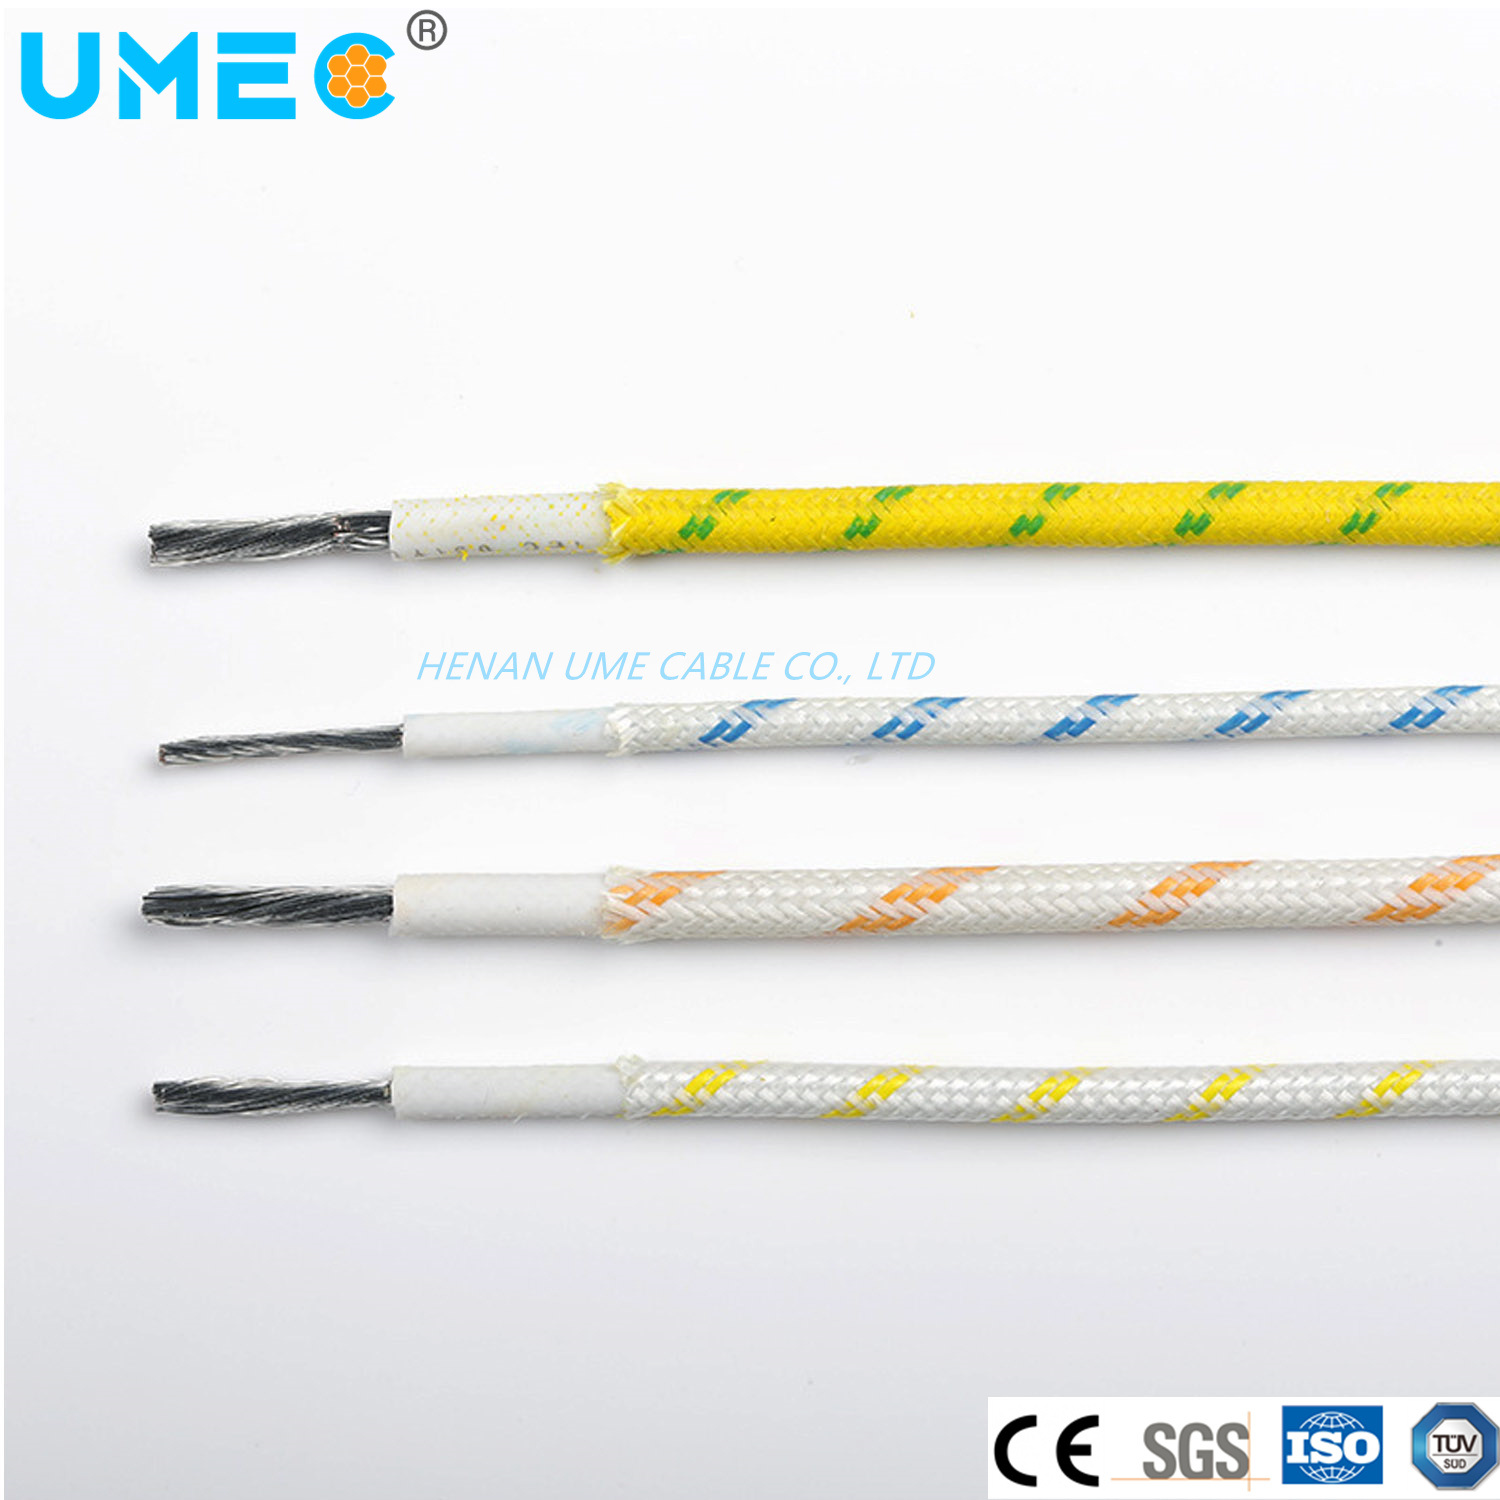 Electrical Heating Resistance Silicone Fiberglass Braided Lead Wire Agrp Yg Sif/Gl Cable Wire